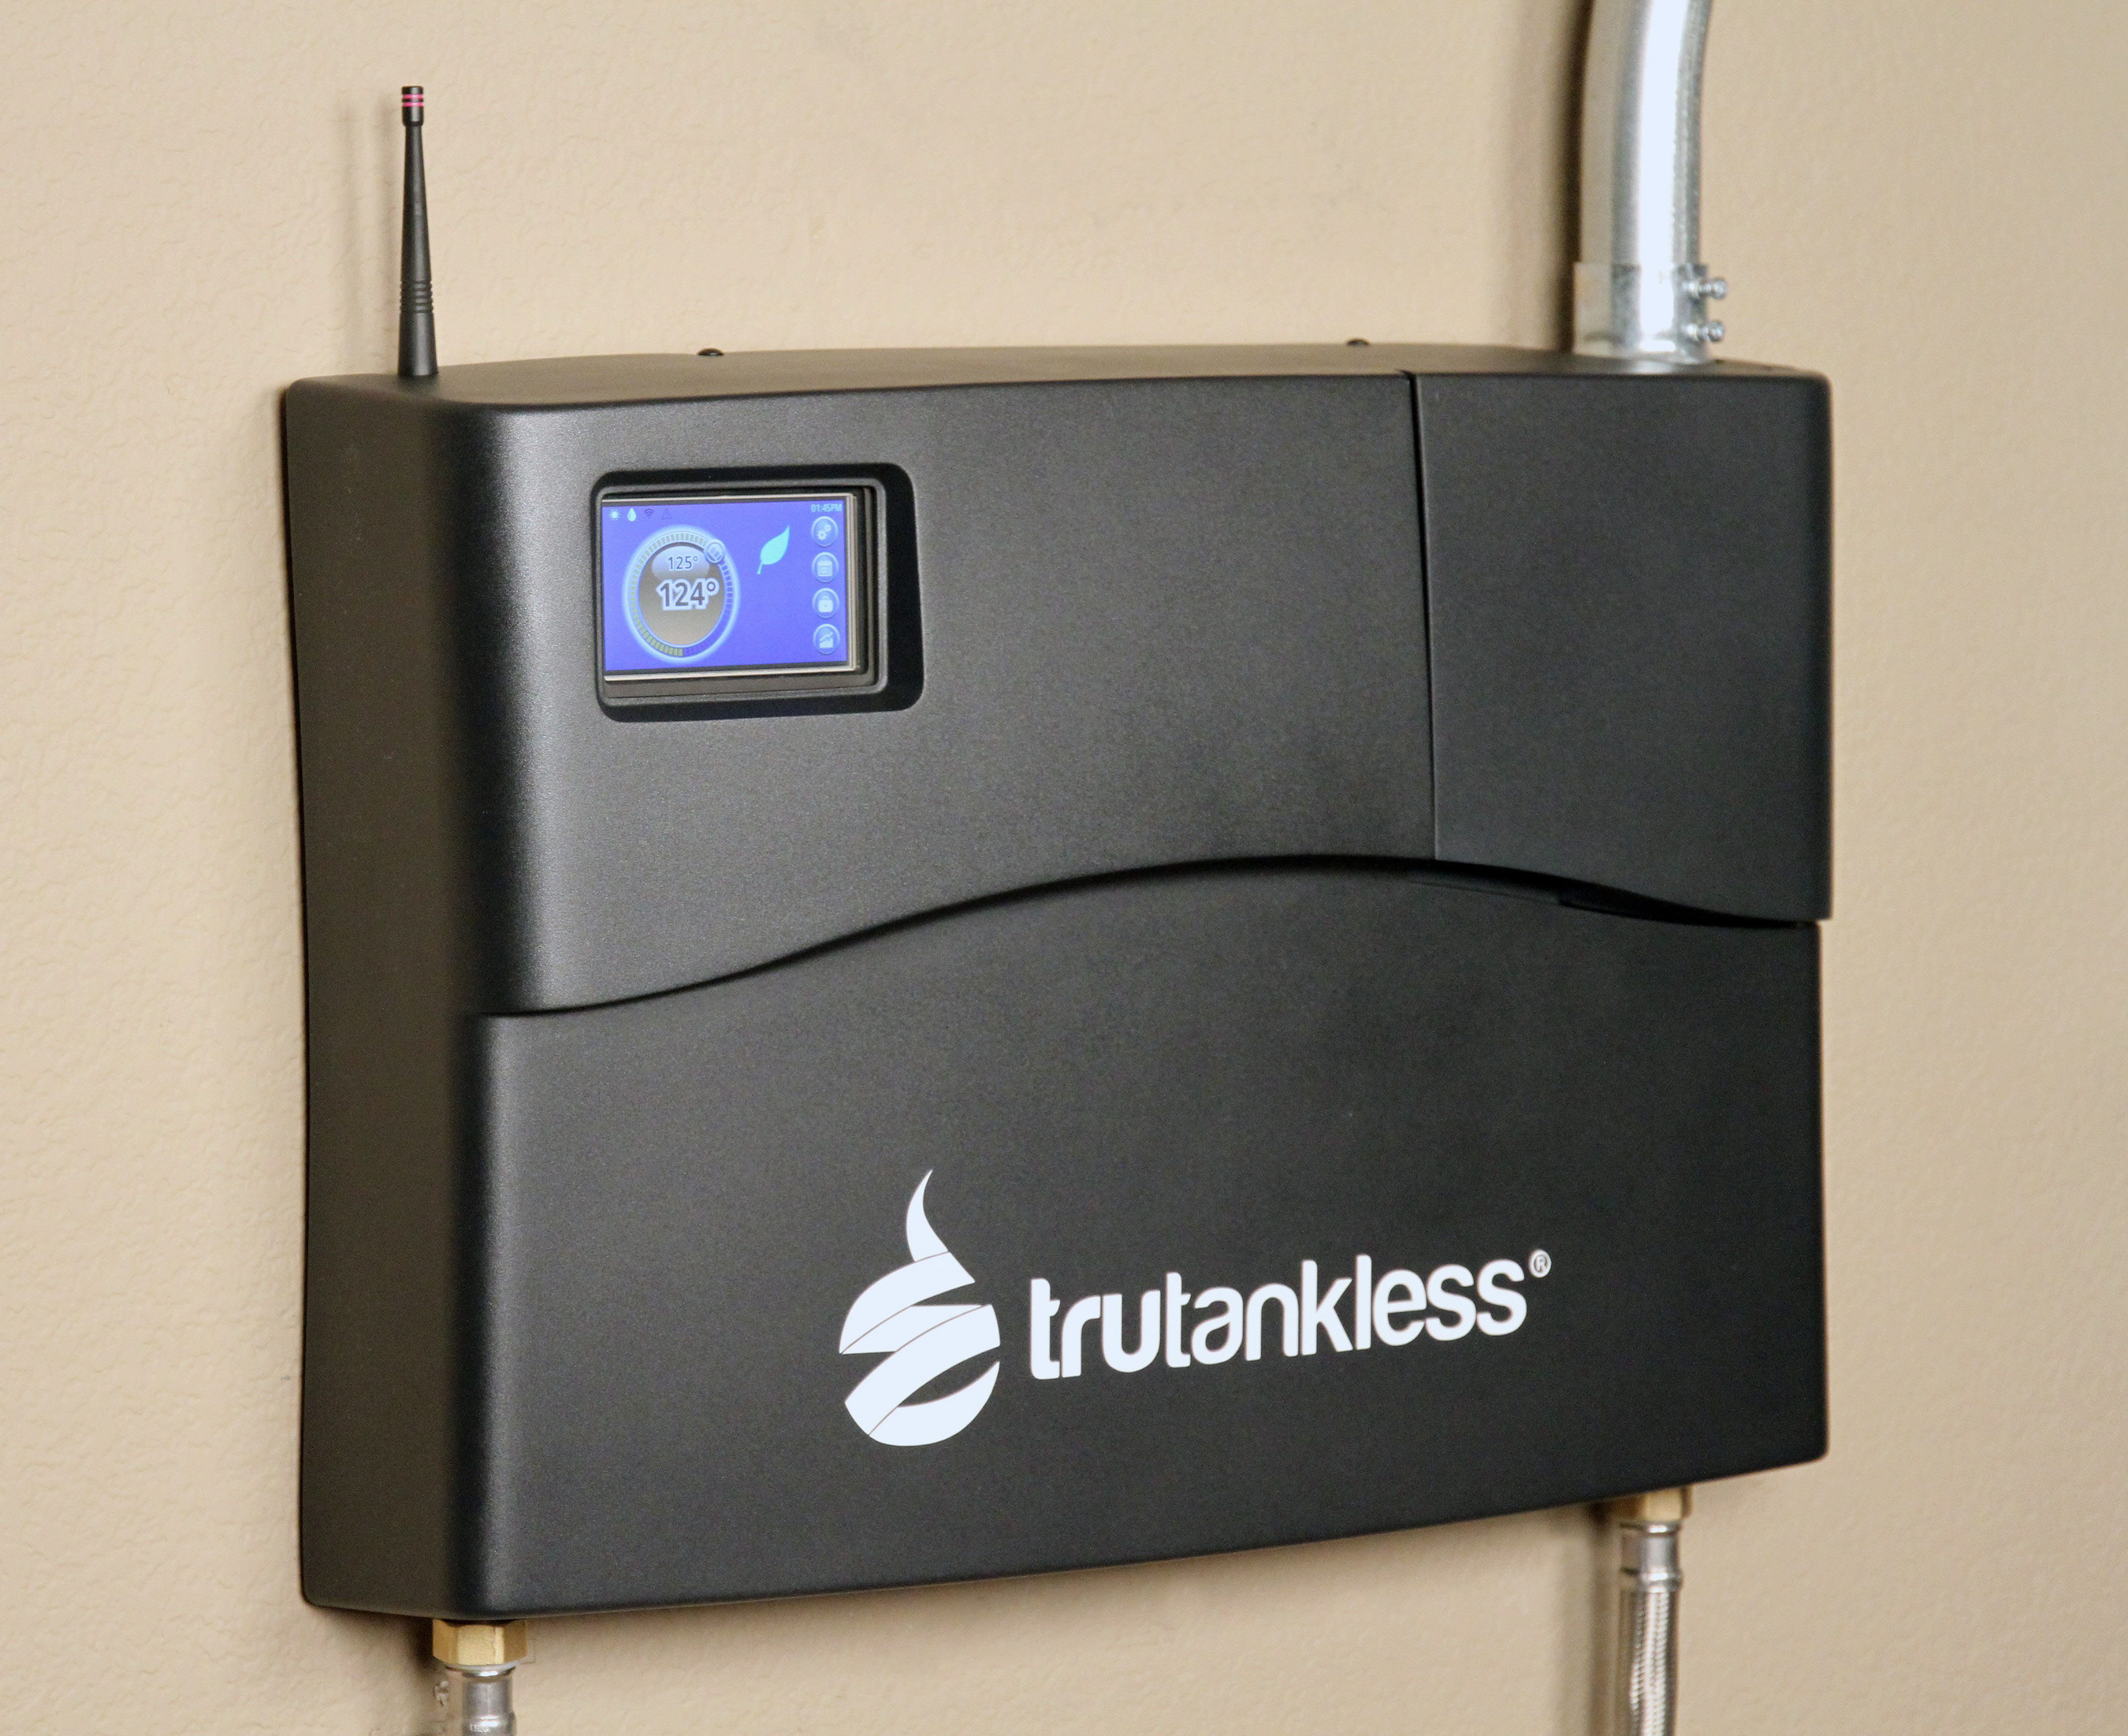 Packed with patent-pending proprietary technology, the trutankless line of smart electric tankless water heaters is masterfully engineered to outperform and outlast its predecessors. It comes complete with its own online control panel (www.mytankless.com) that allows homeowners to monitor water usage and control temperature and operation from their smart phone or mobile device. www.trutankless.com.